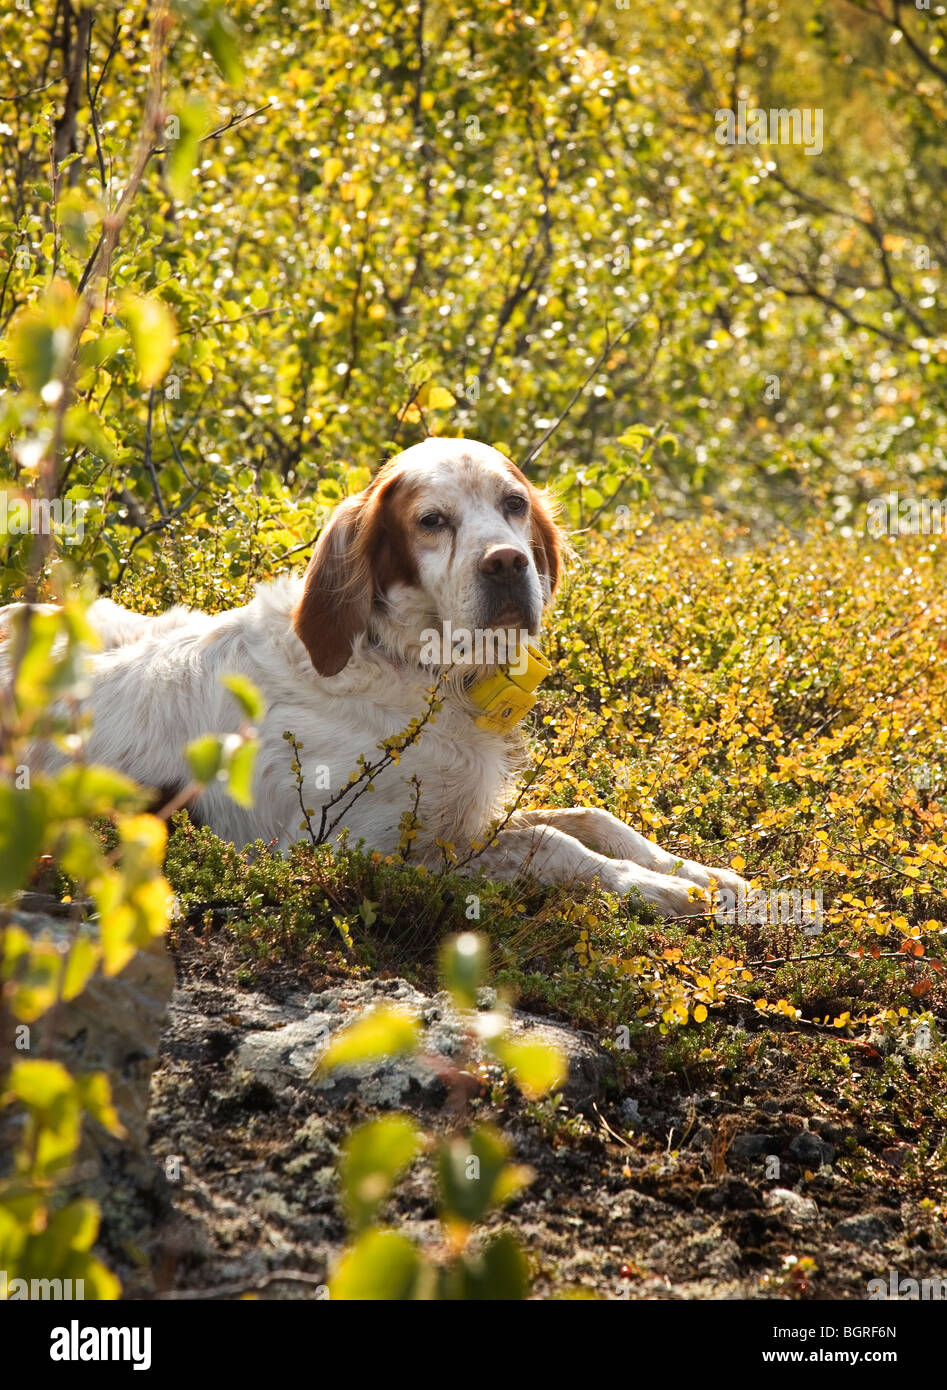 A dog in the sun, Sweden. Stock Photo